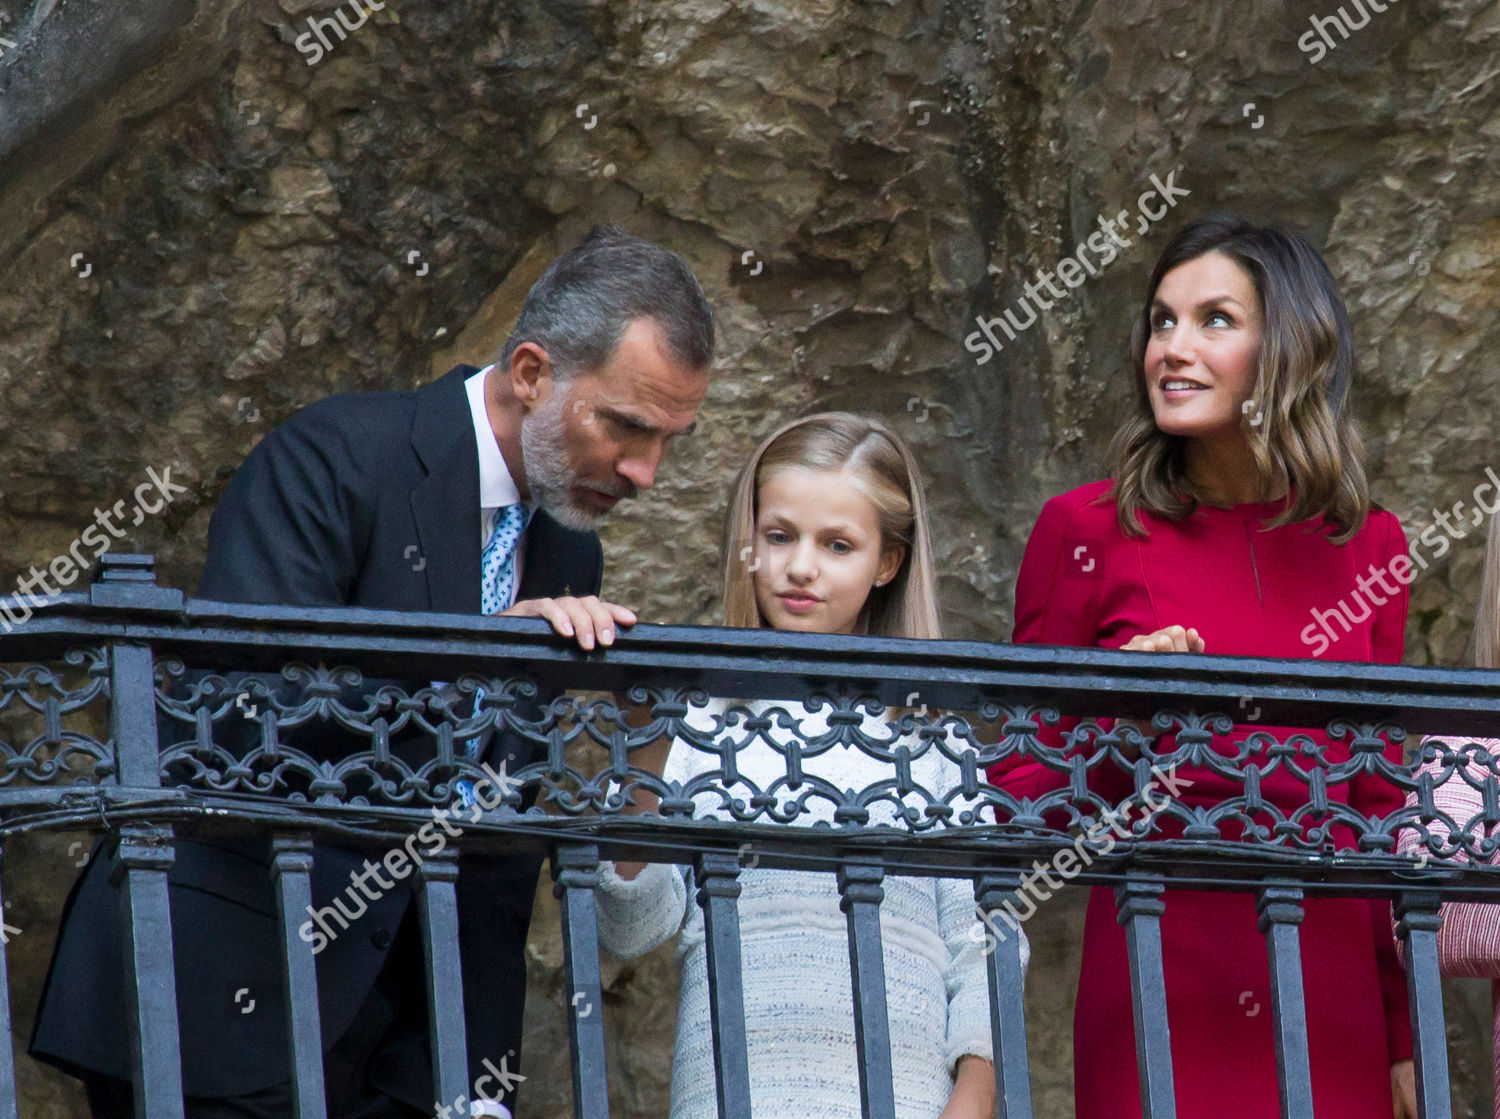 first-official-visit-of-princess-leonor-to-asturias-spain-shutterstock-editorial-9877305k.jpg